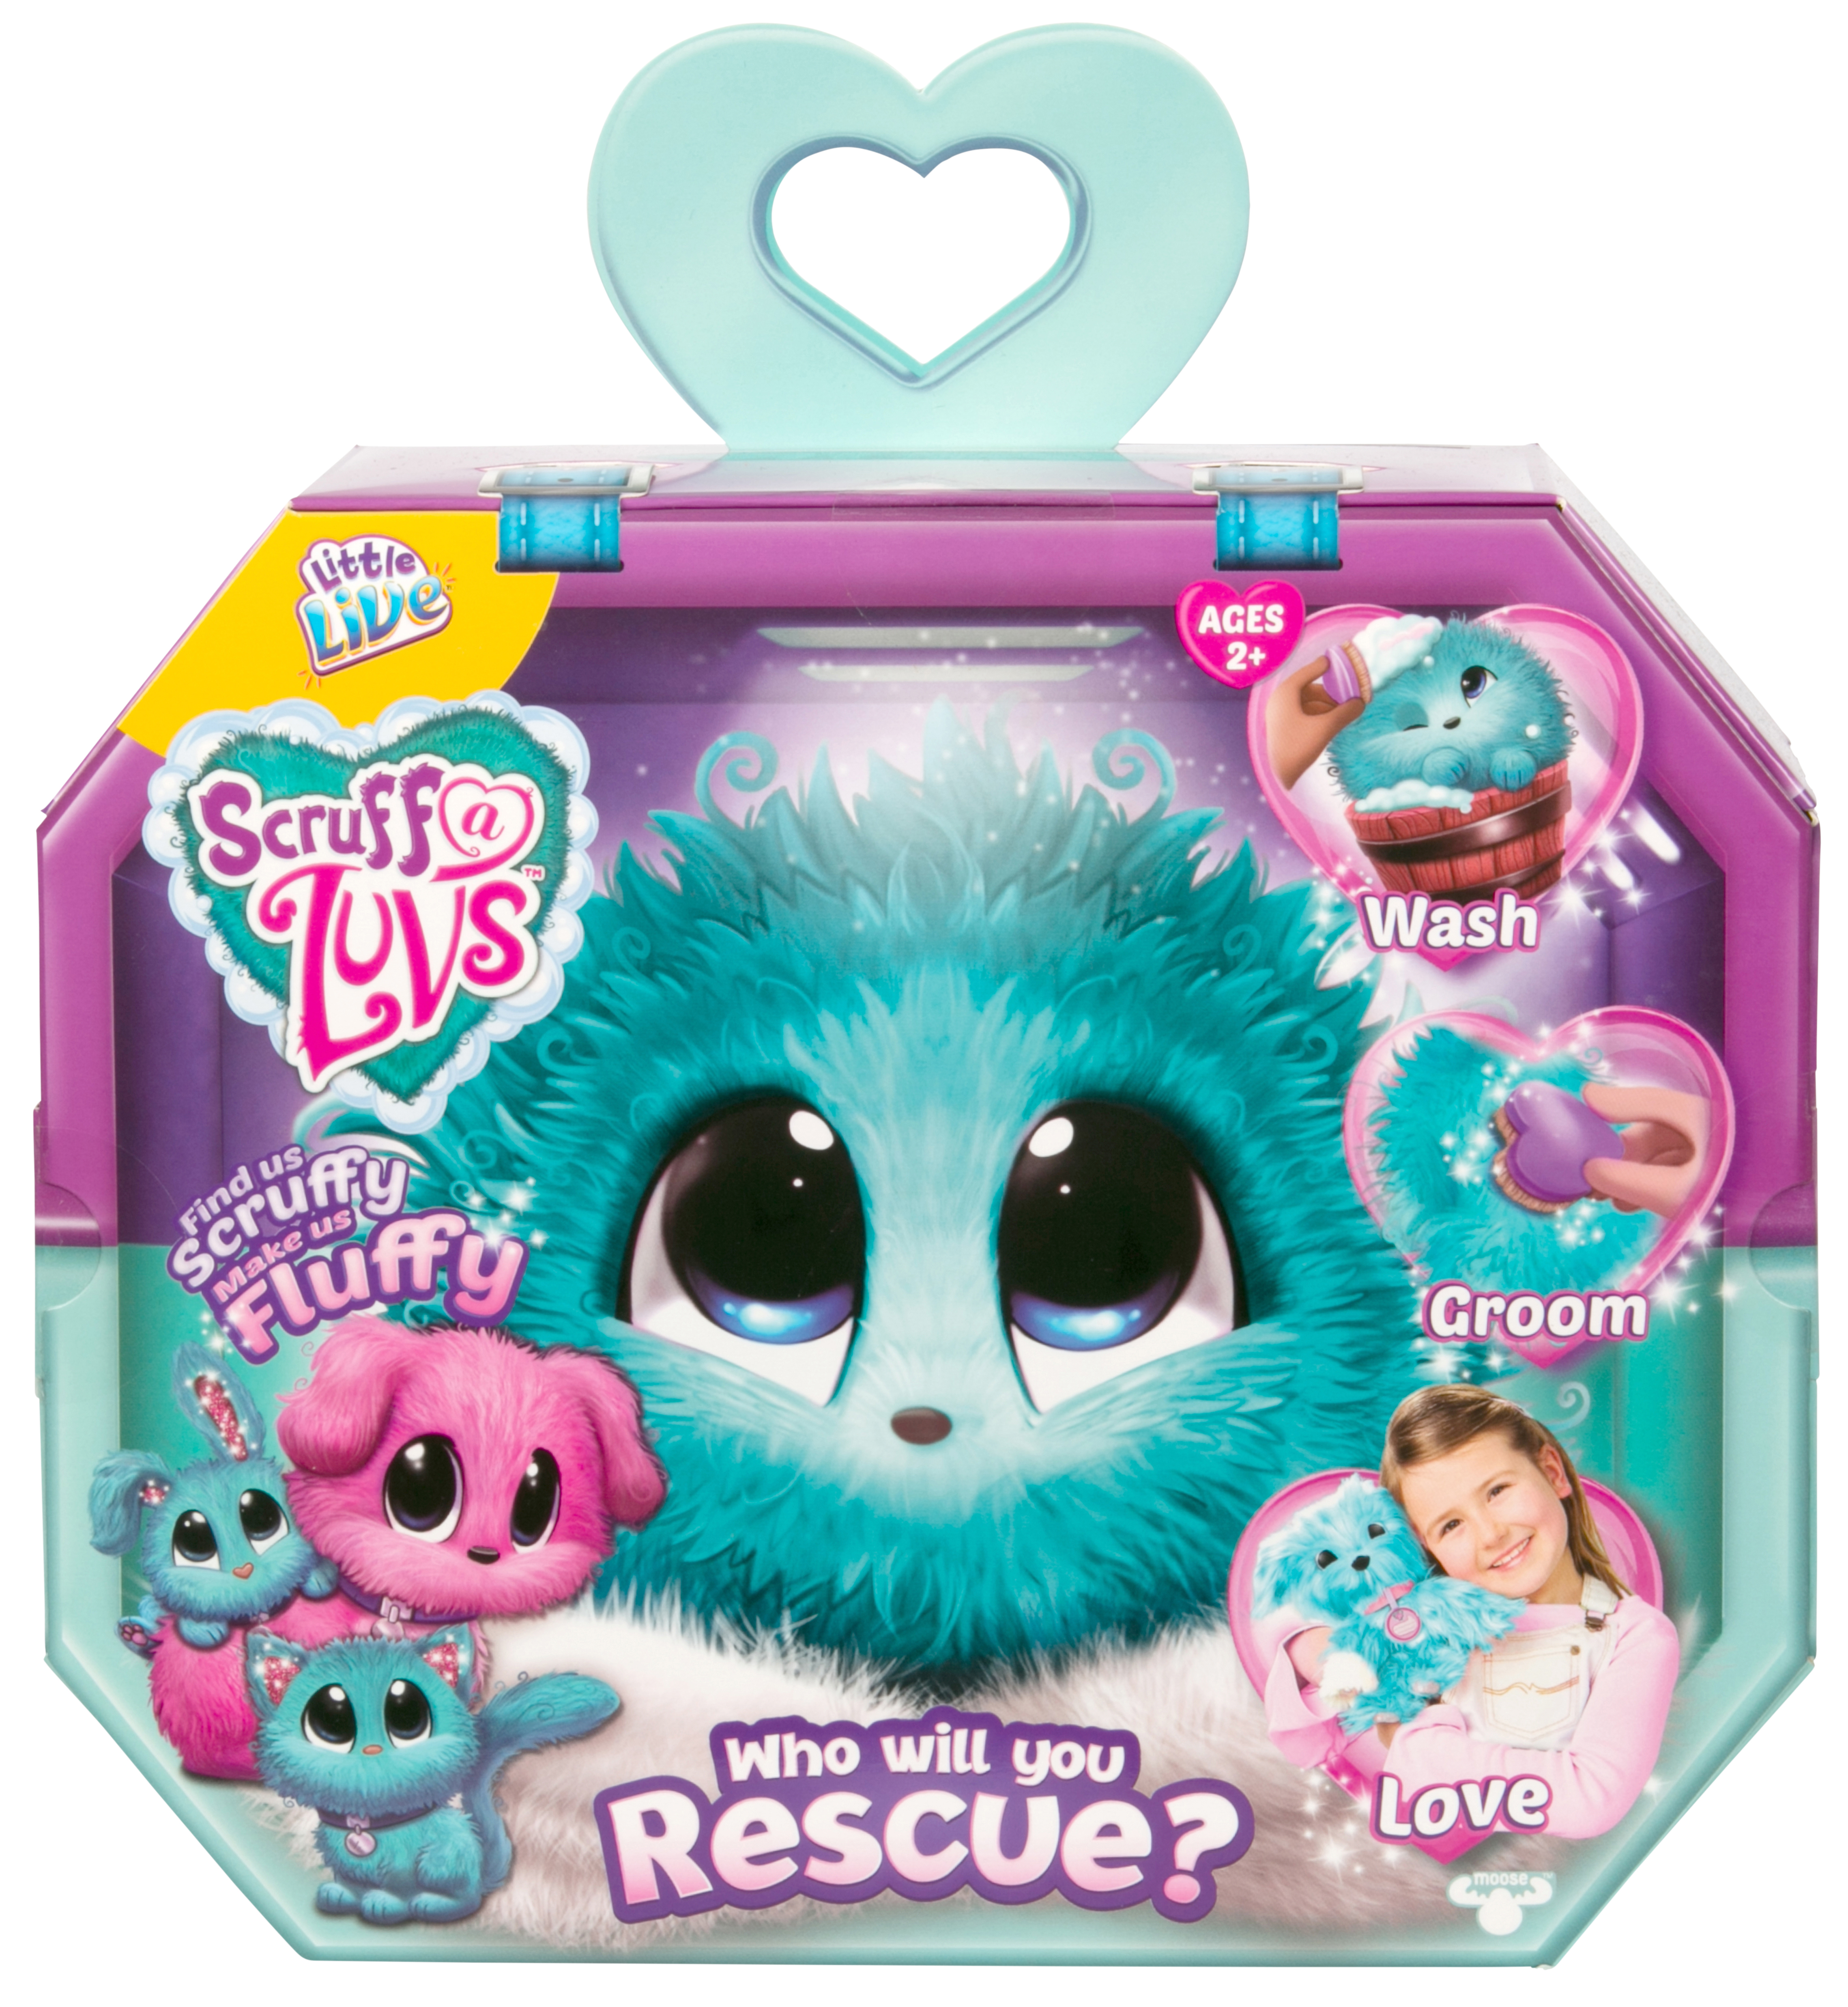 Moose Toys Little Live Scruff-A-Luv's 